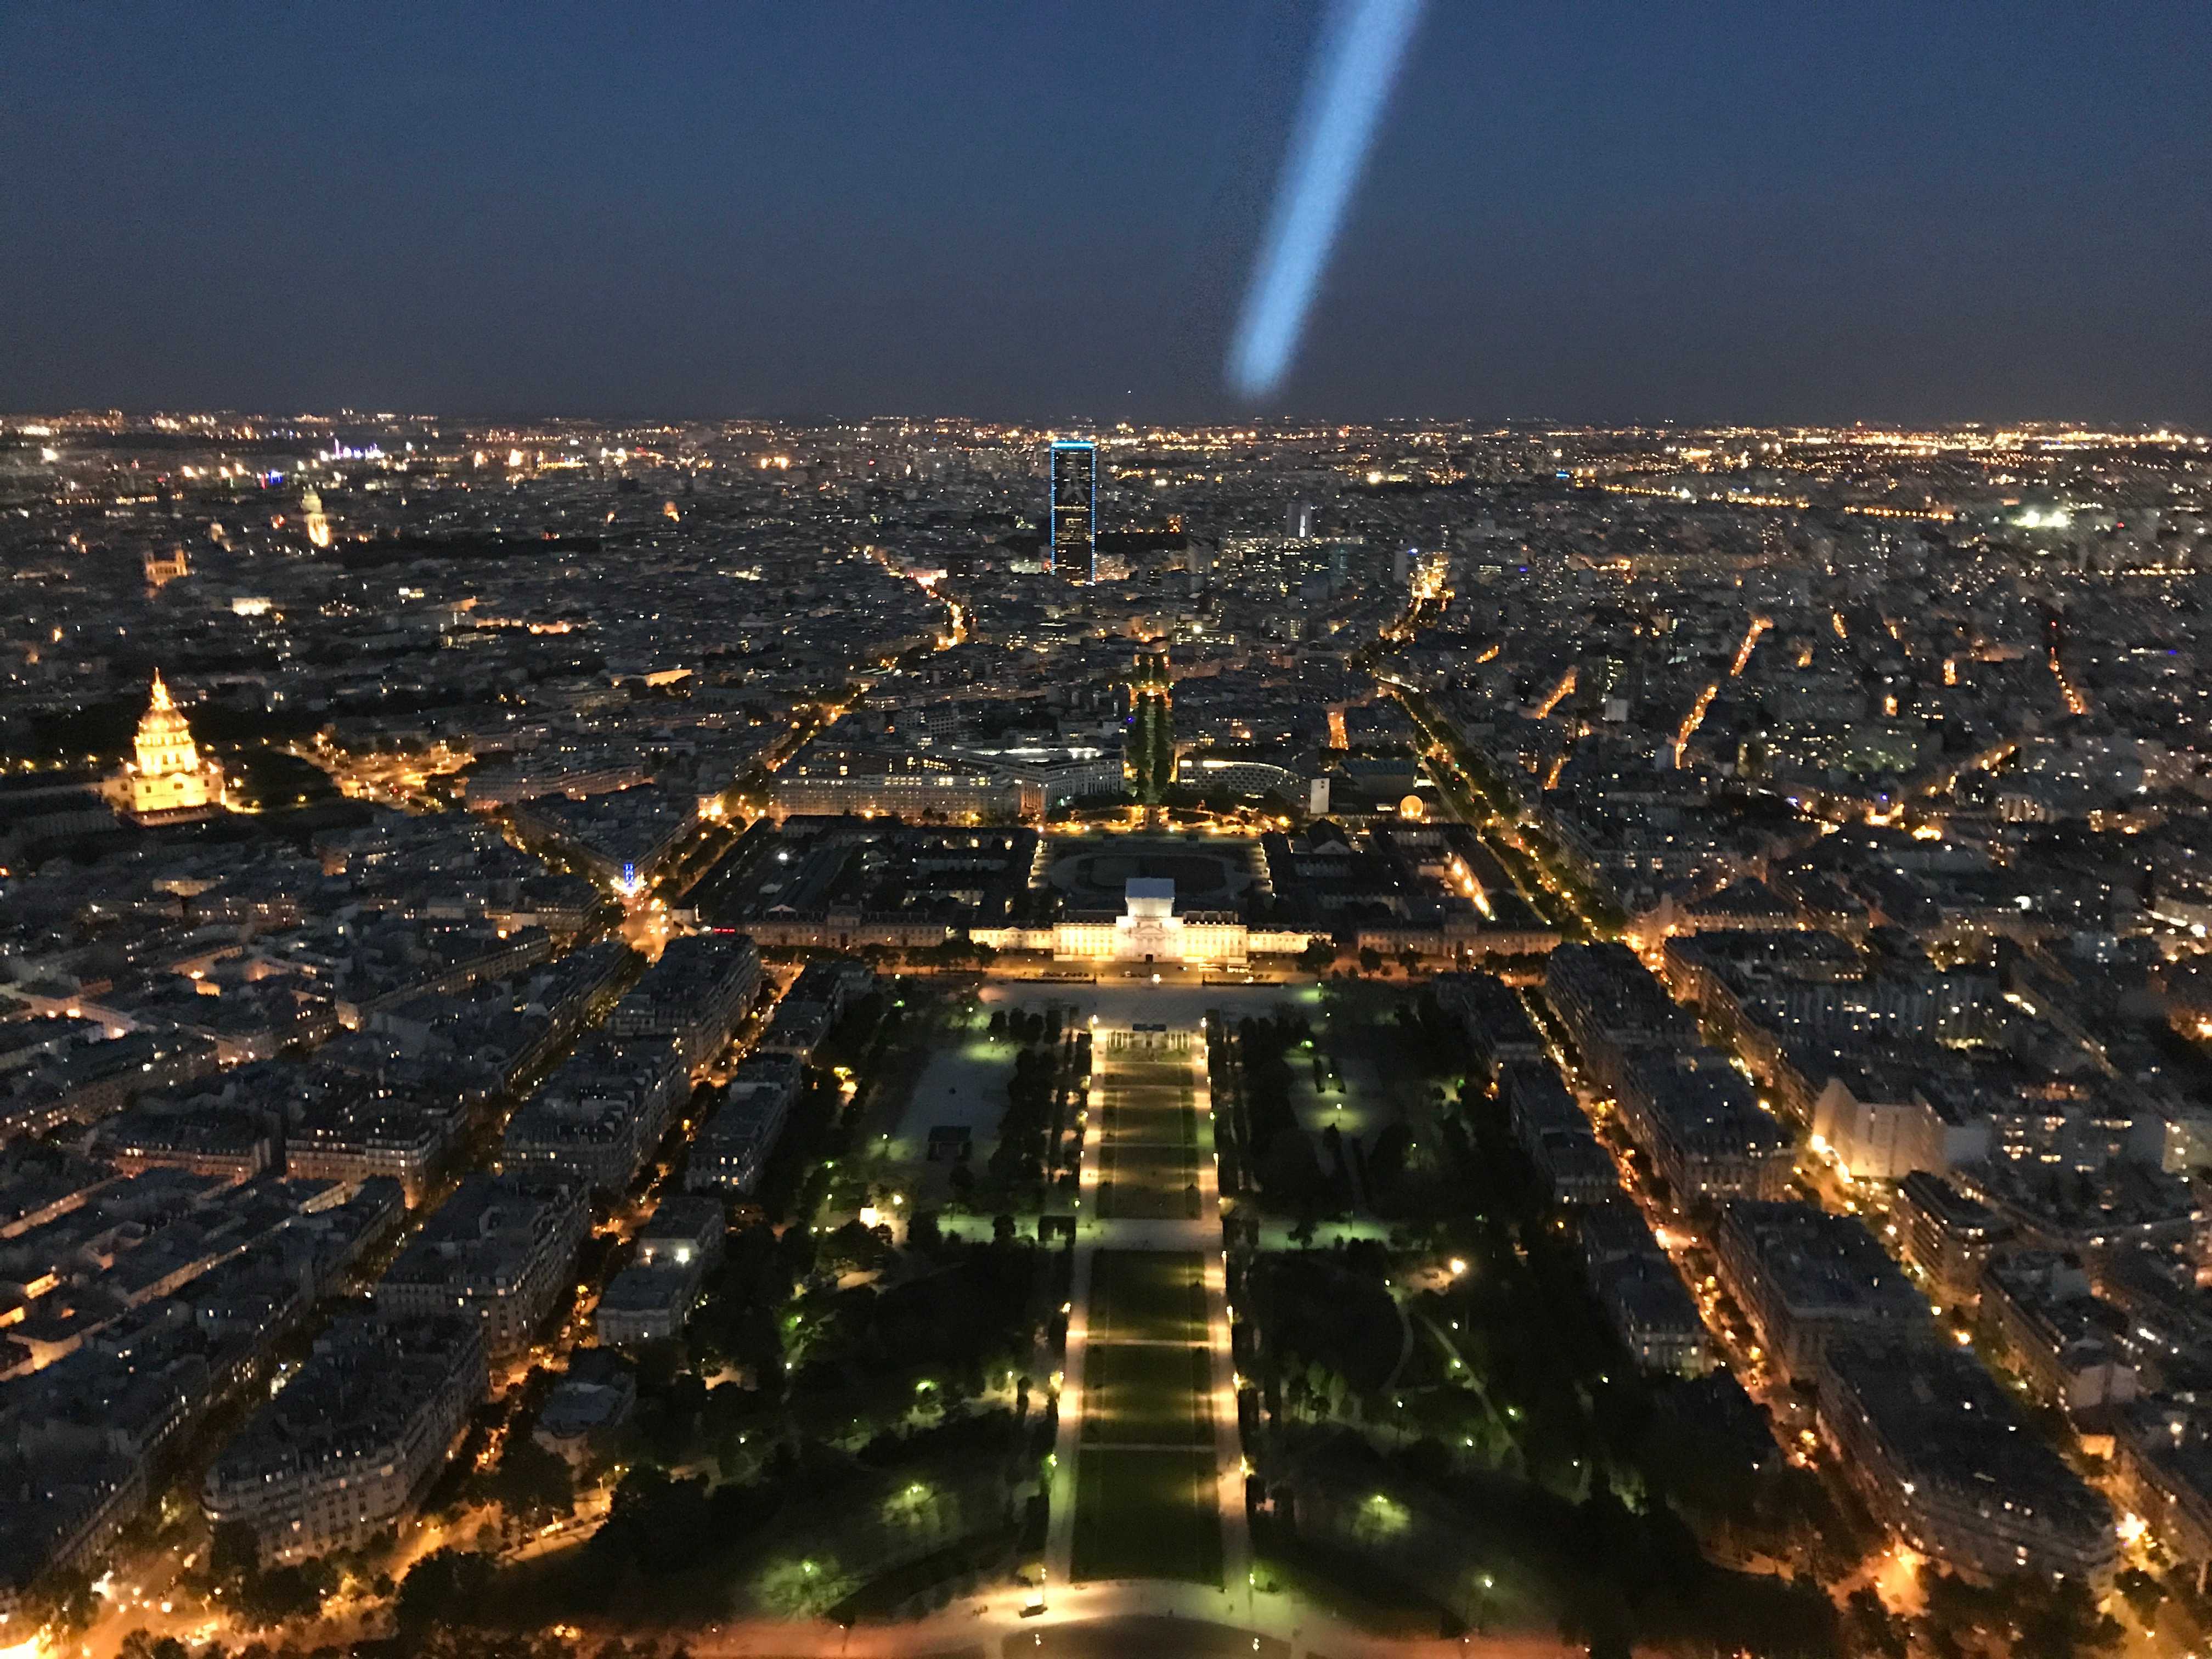 The city of Paris at night, viewed from above at the top of the Eiffel Tower; a dark green park is punctured by golden streetlights, surrounded by many city streets lit by buildings and streetlamps. A bright beam of light shines from overhead toward the horizon.